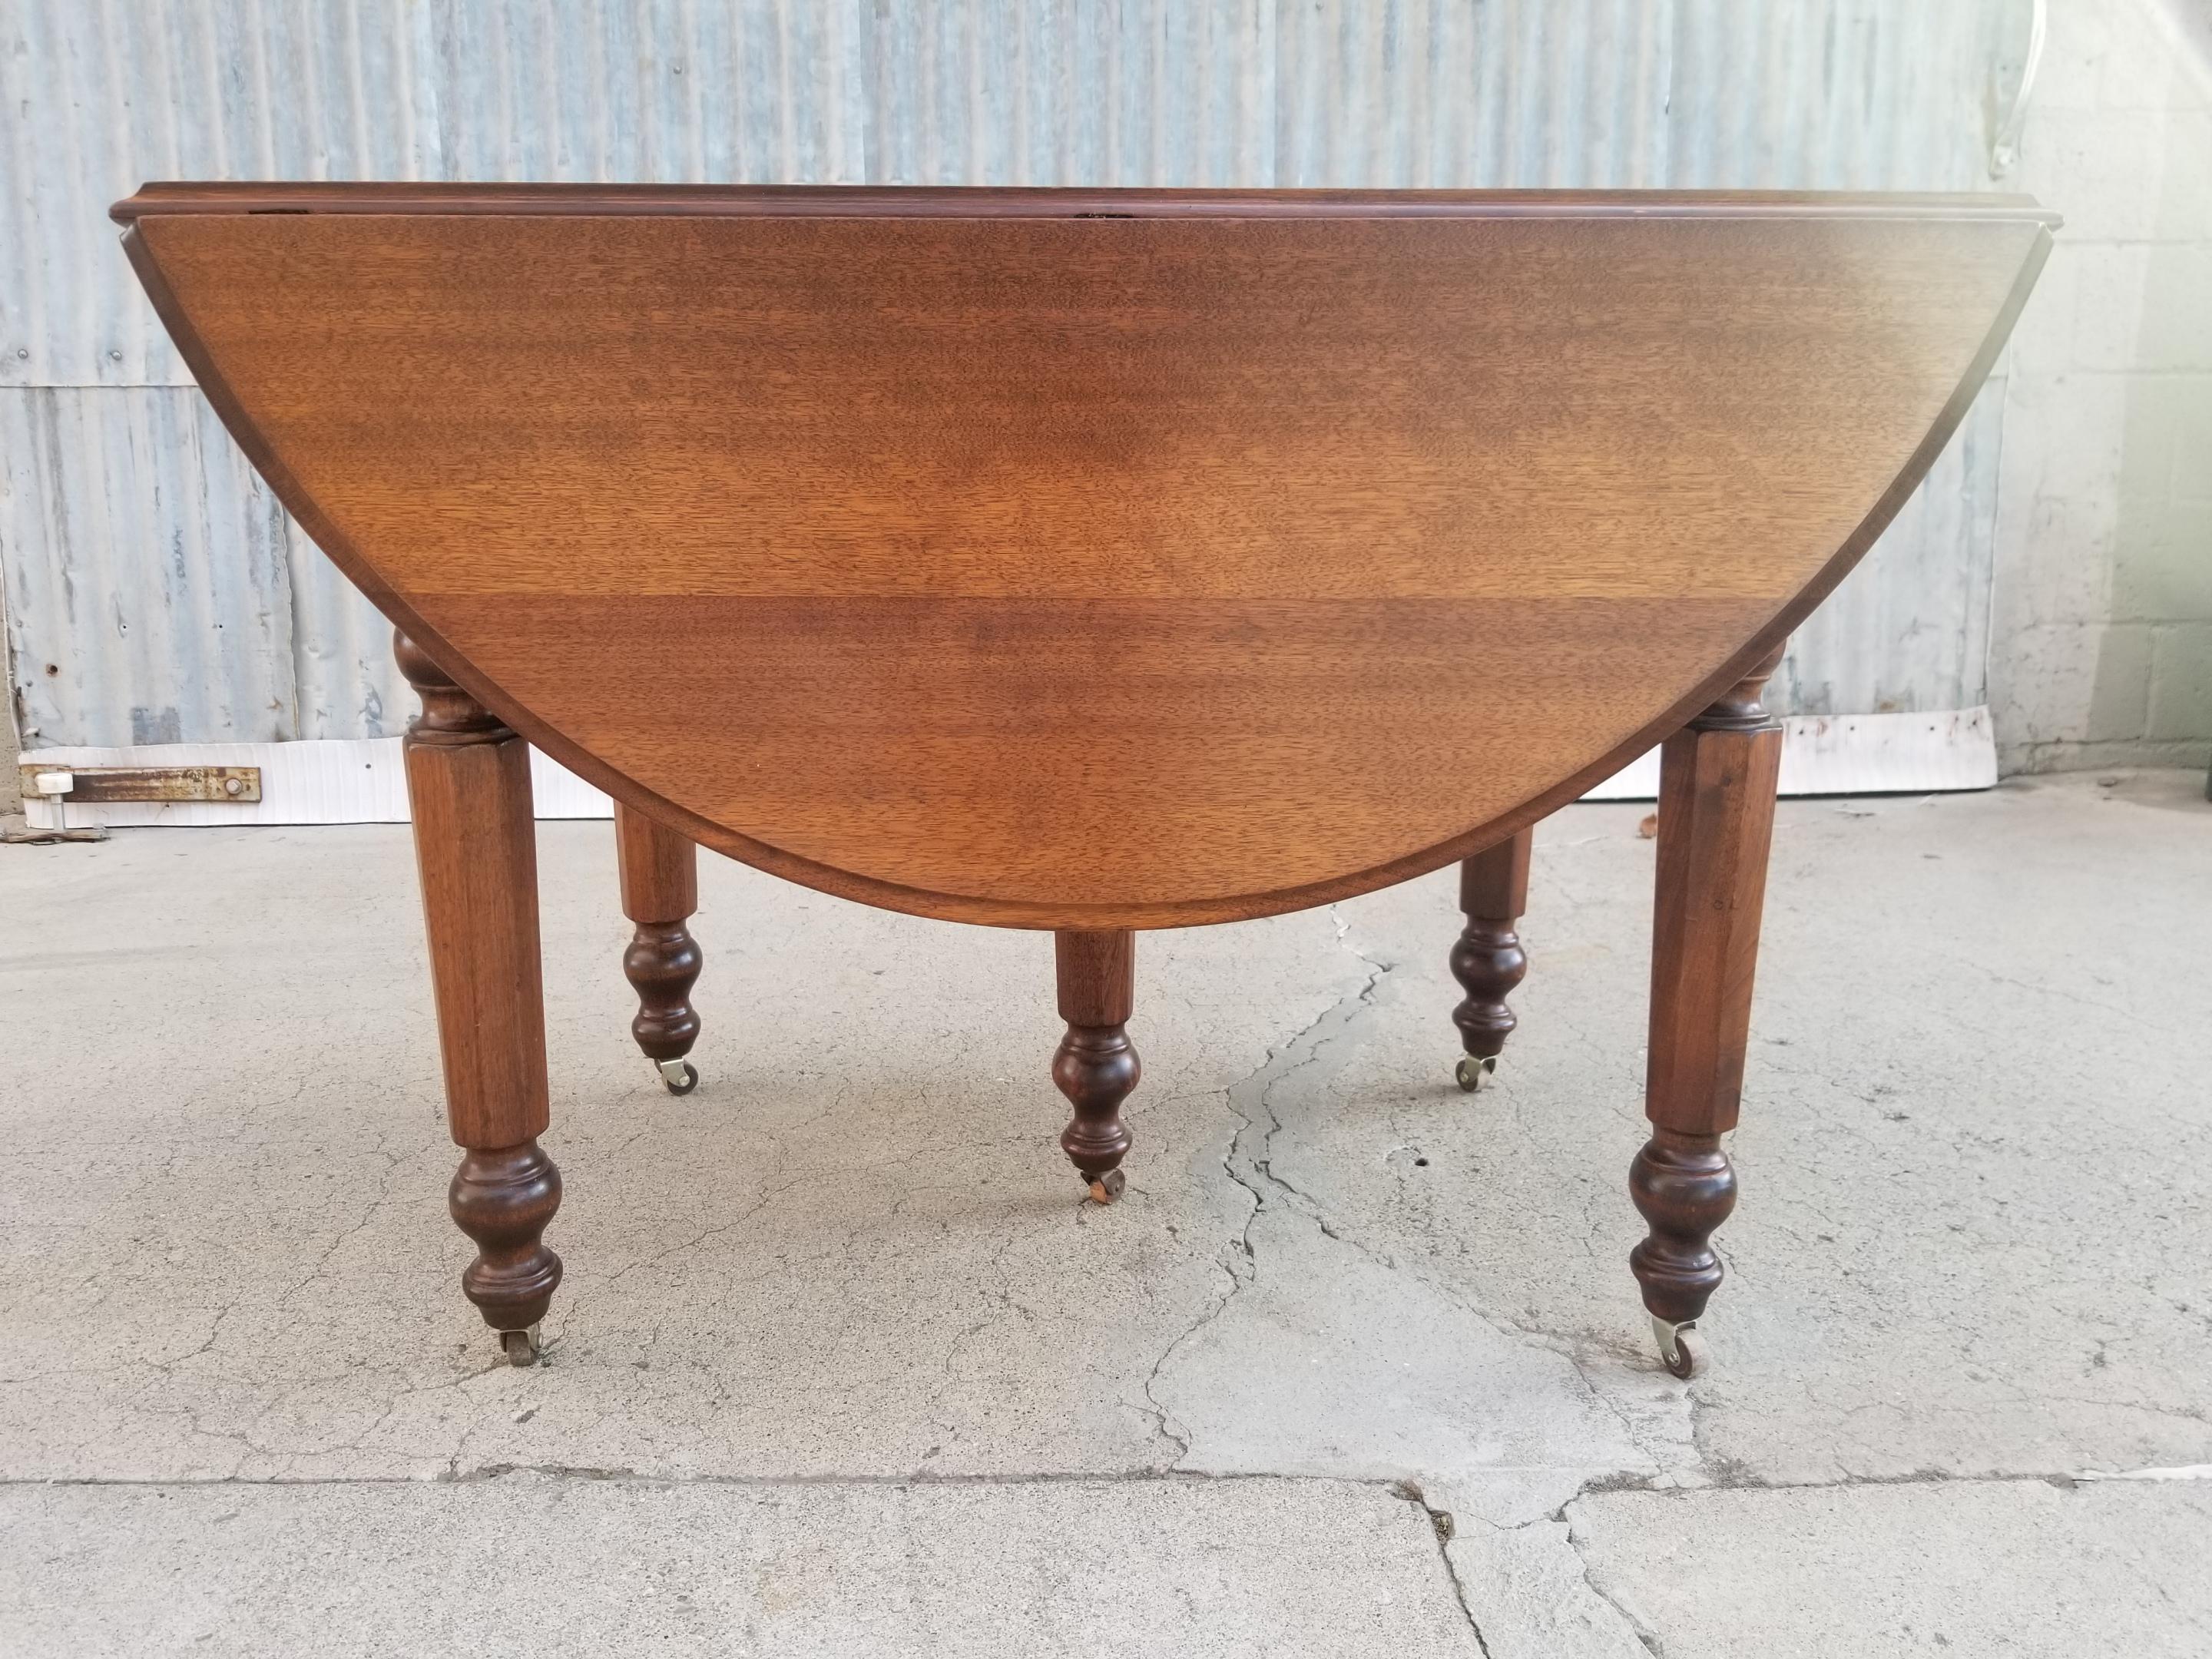 Late 19th century drop-leaf expanding dining table crafted in solid walnut. Includes three 11.5